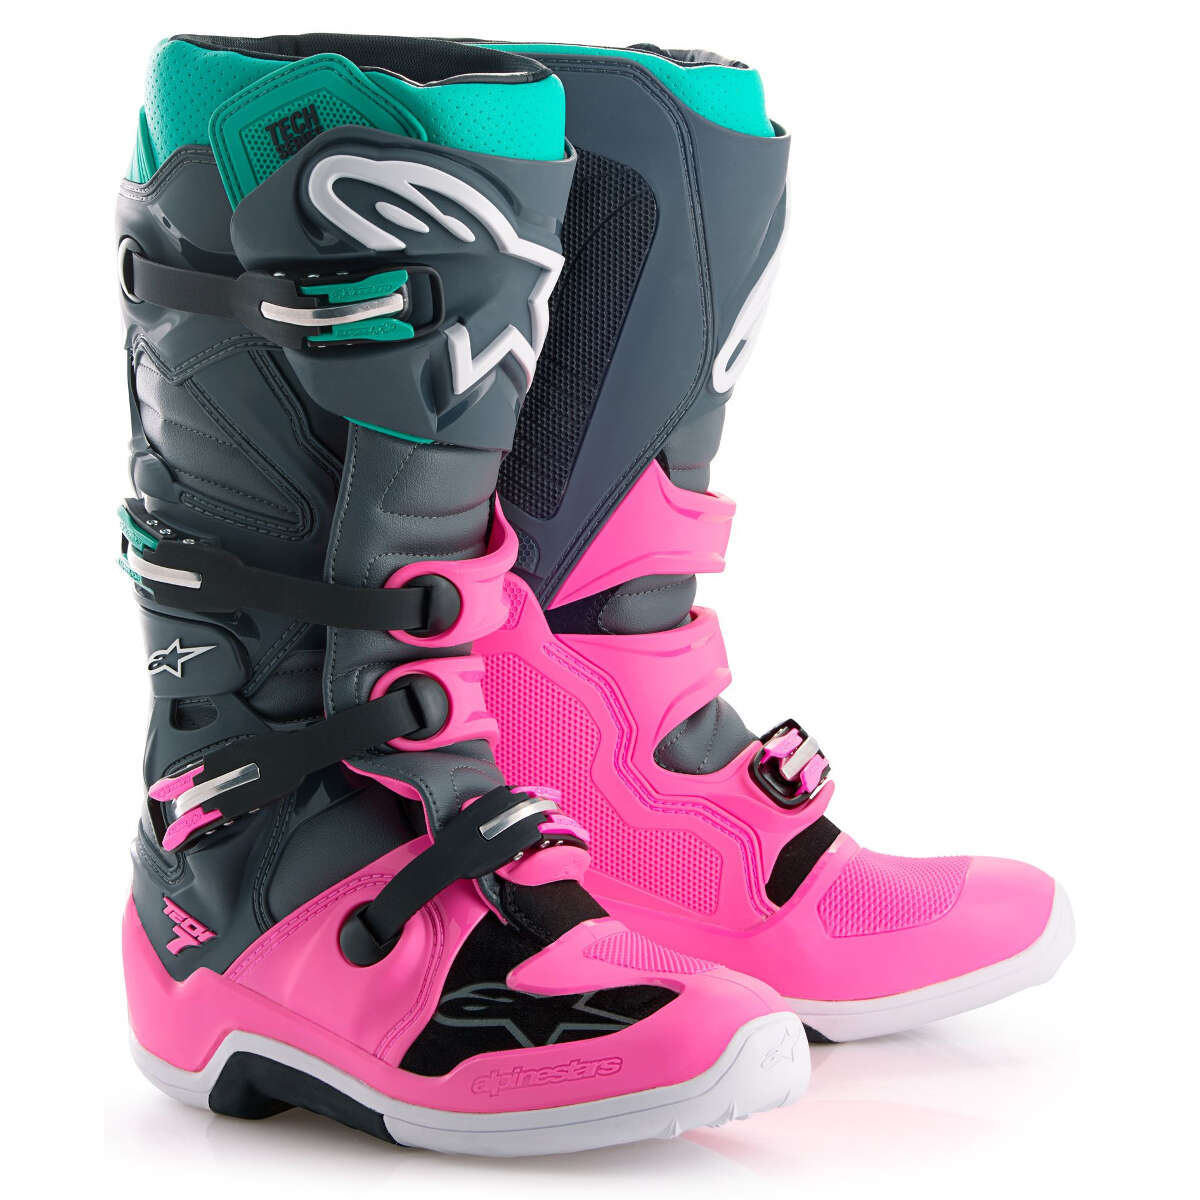 Alpinestars Bottes MX Tech 7 Limited Edition Indy Vice, Gris/Rose/Turquoise